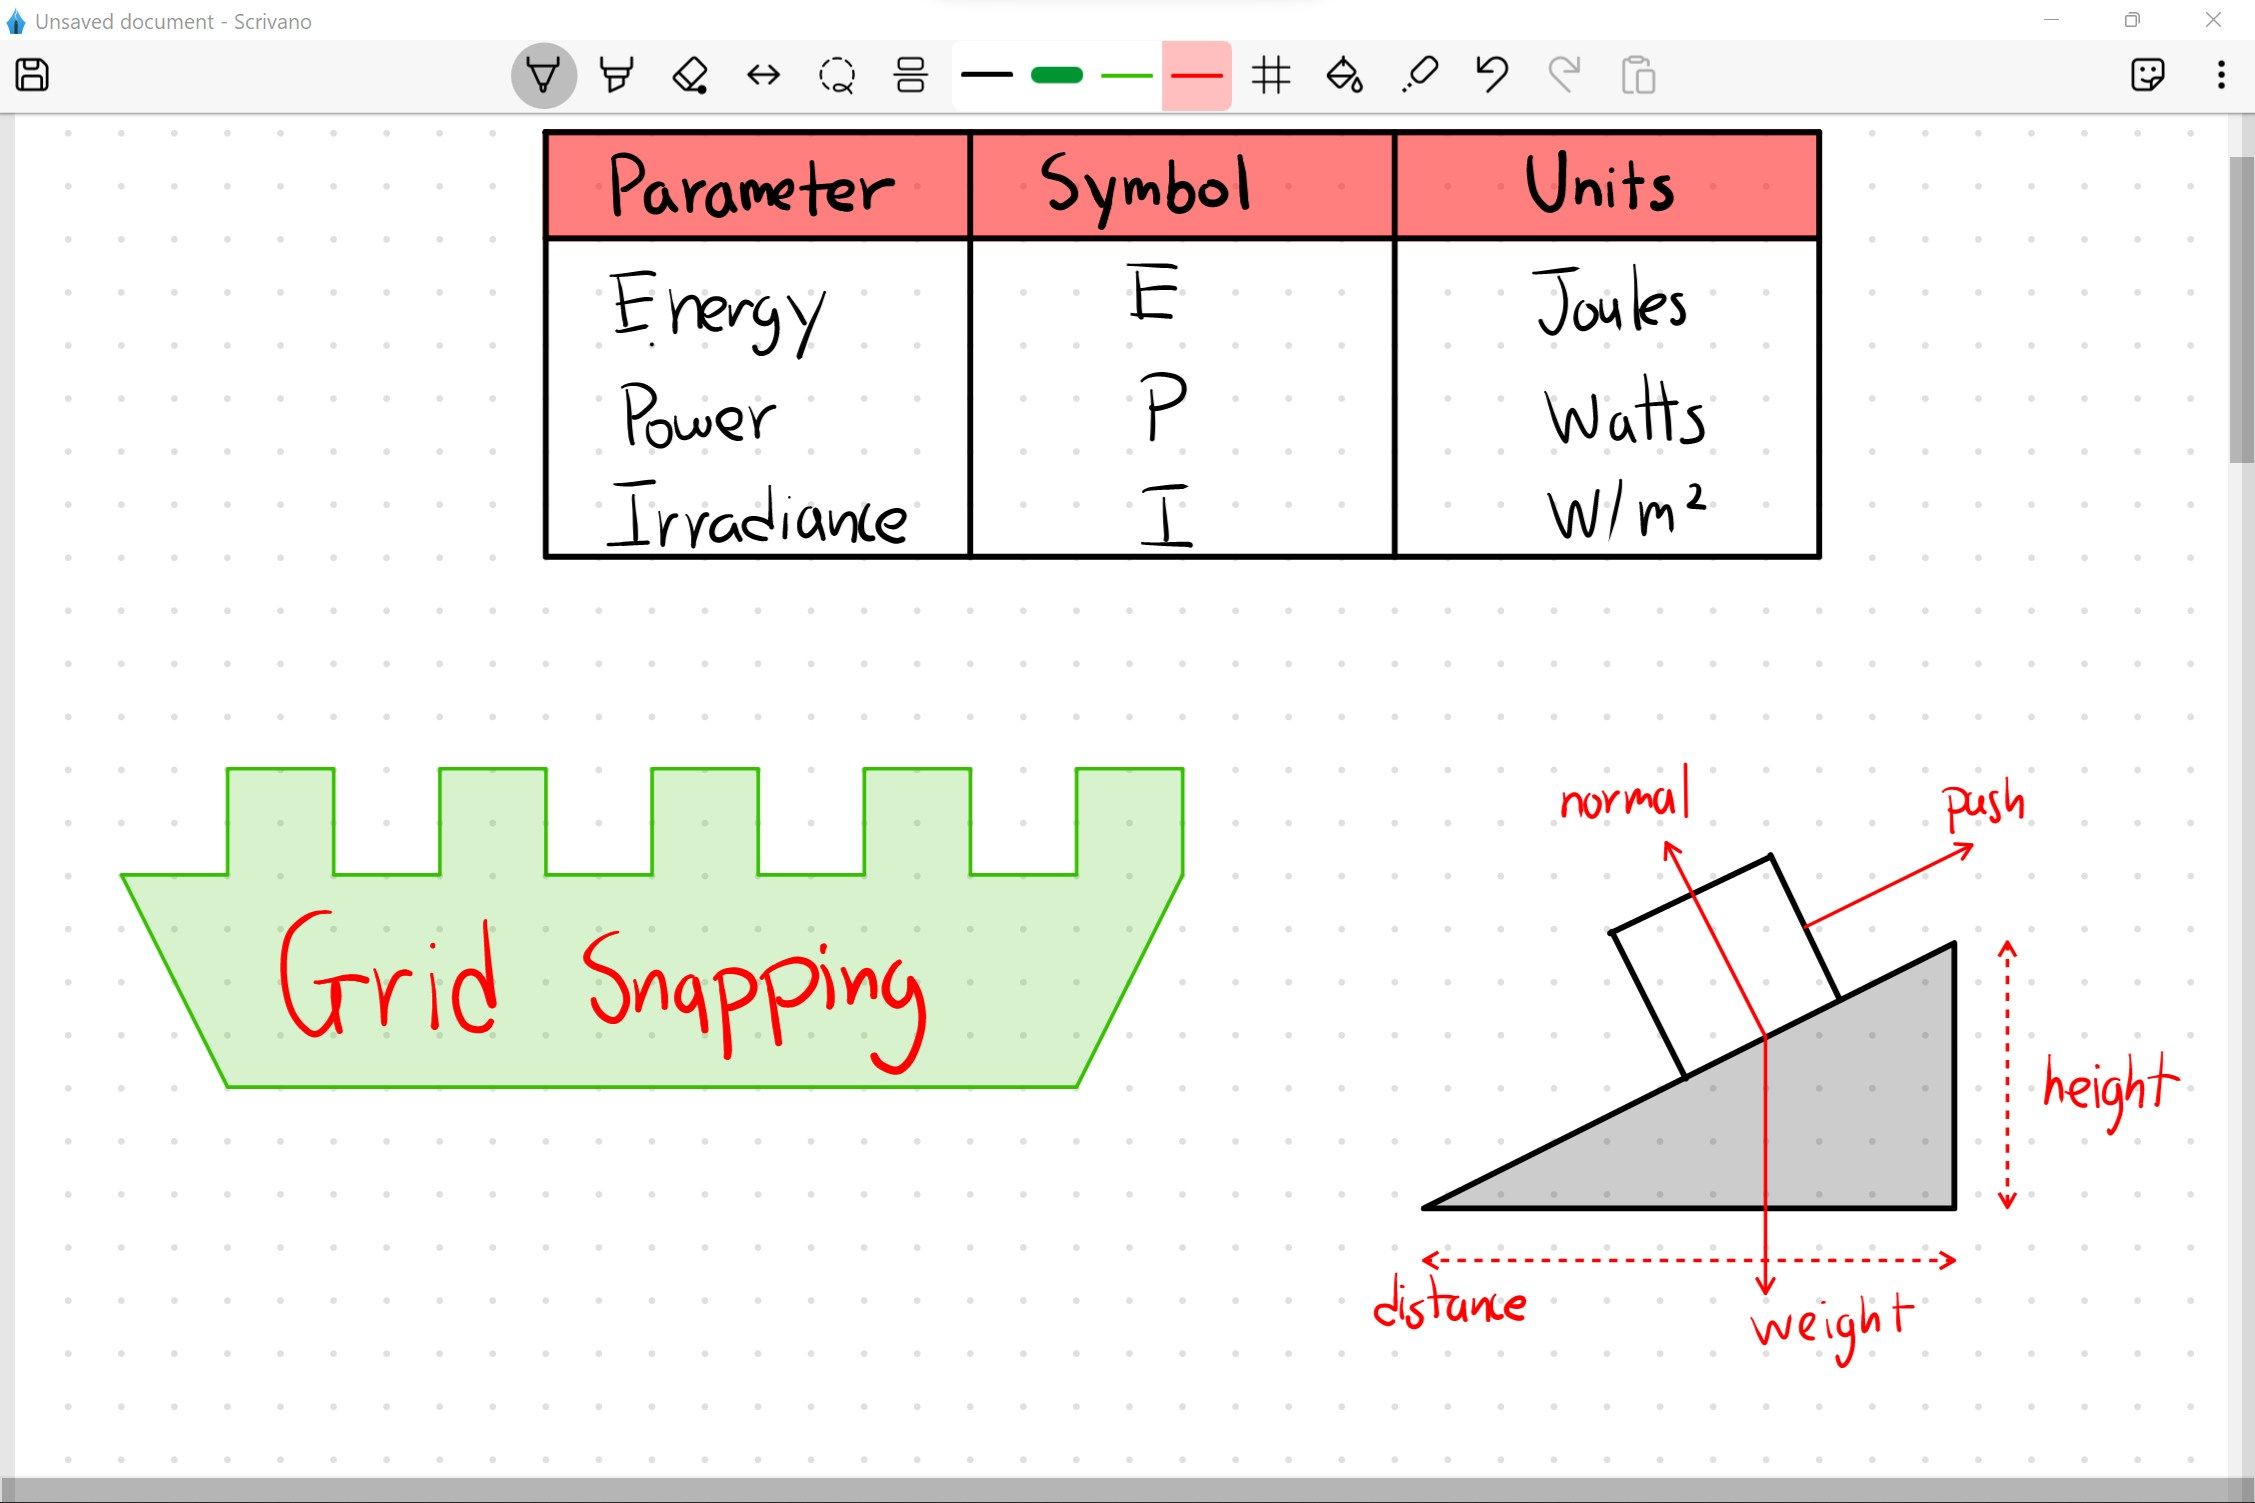 Grid Snapping for easily draw diagrams and tables